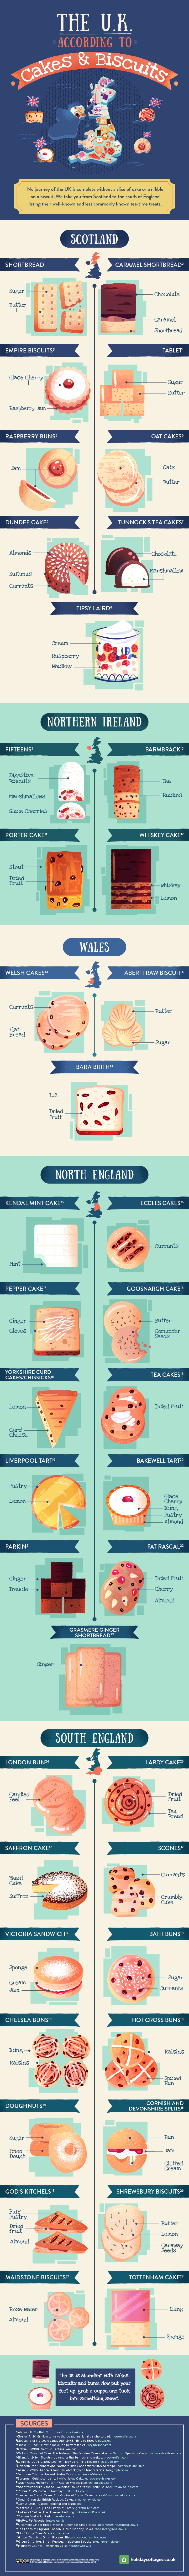 design-the-u.k.-according-to-cakes-and-biscuits